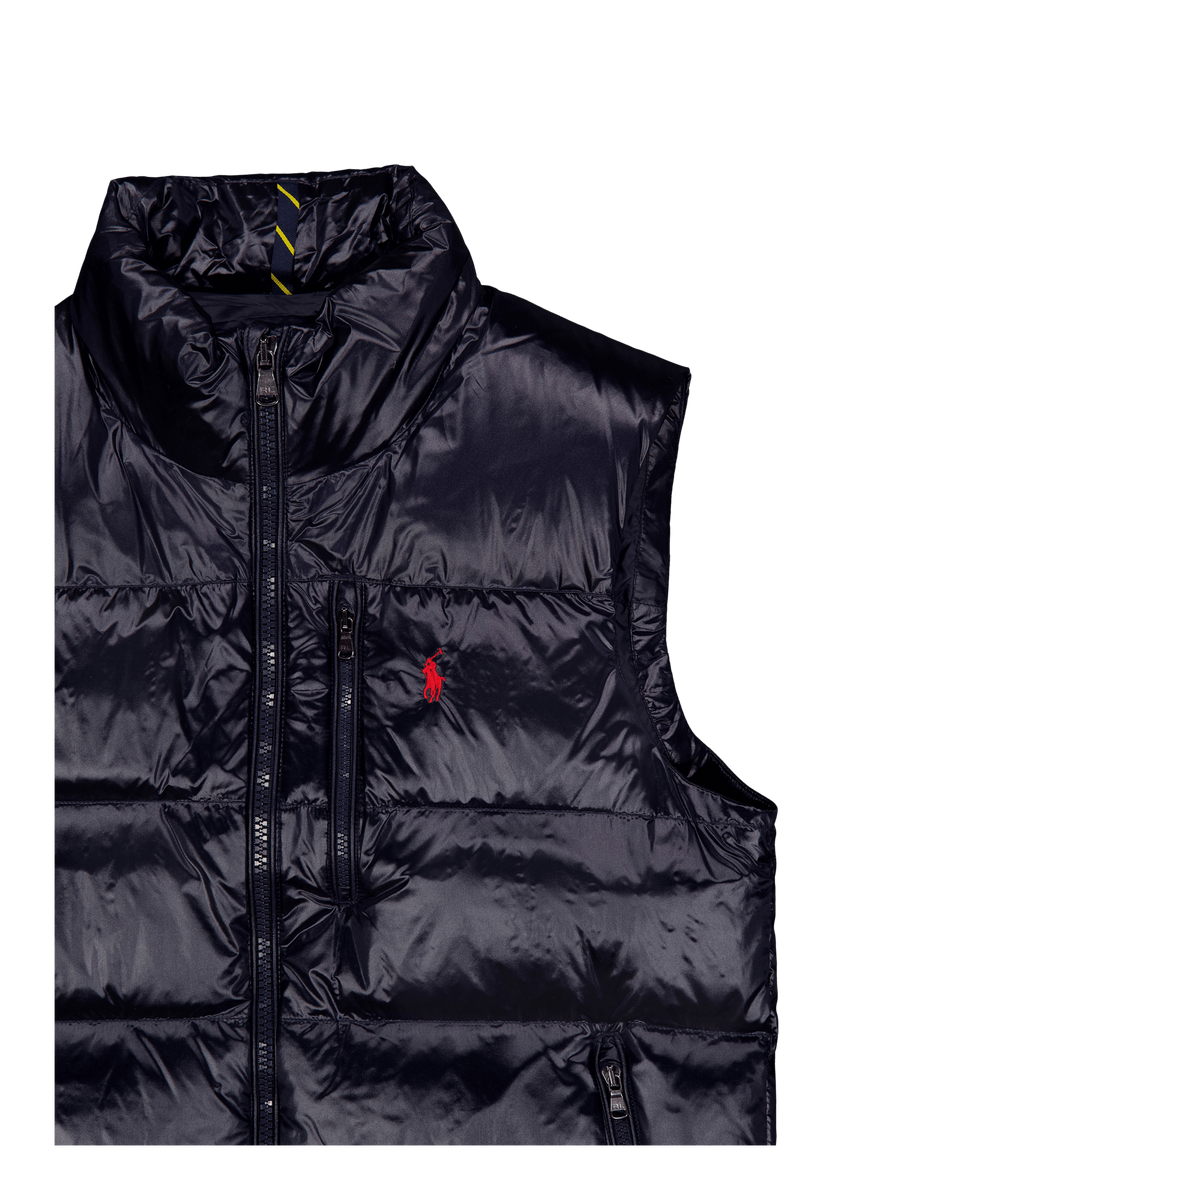 Polo Ralph Lauren Glossy El Cap Vest 004 Collection  Glossy